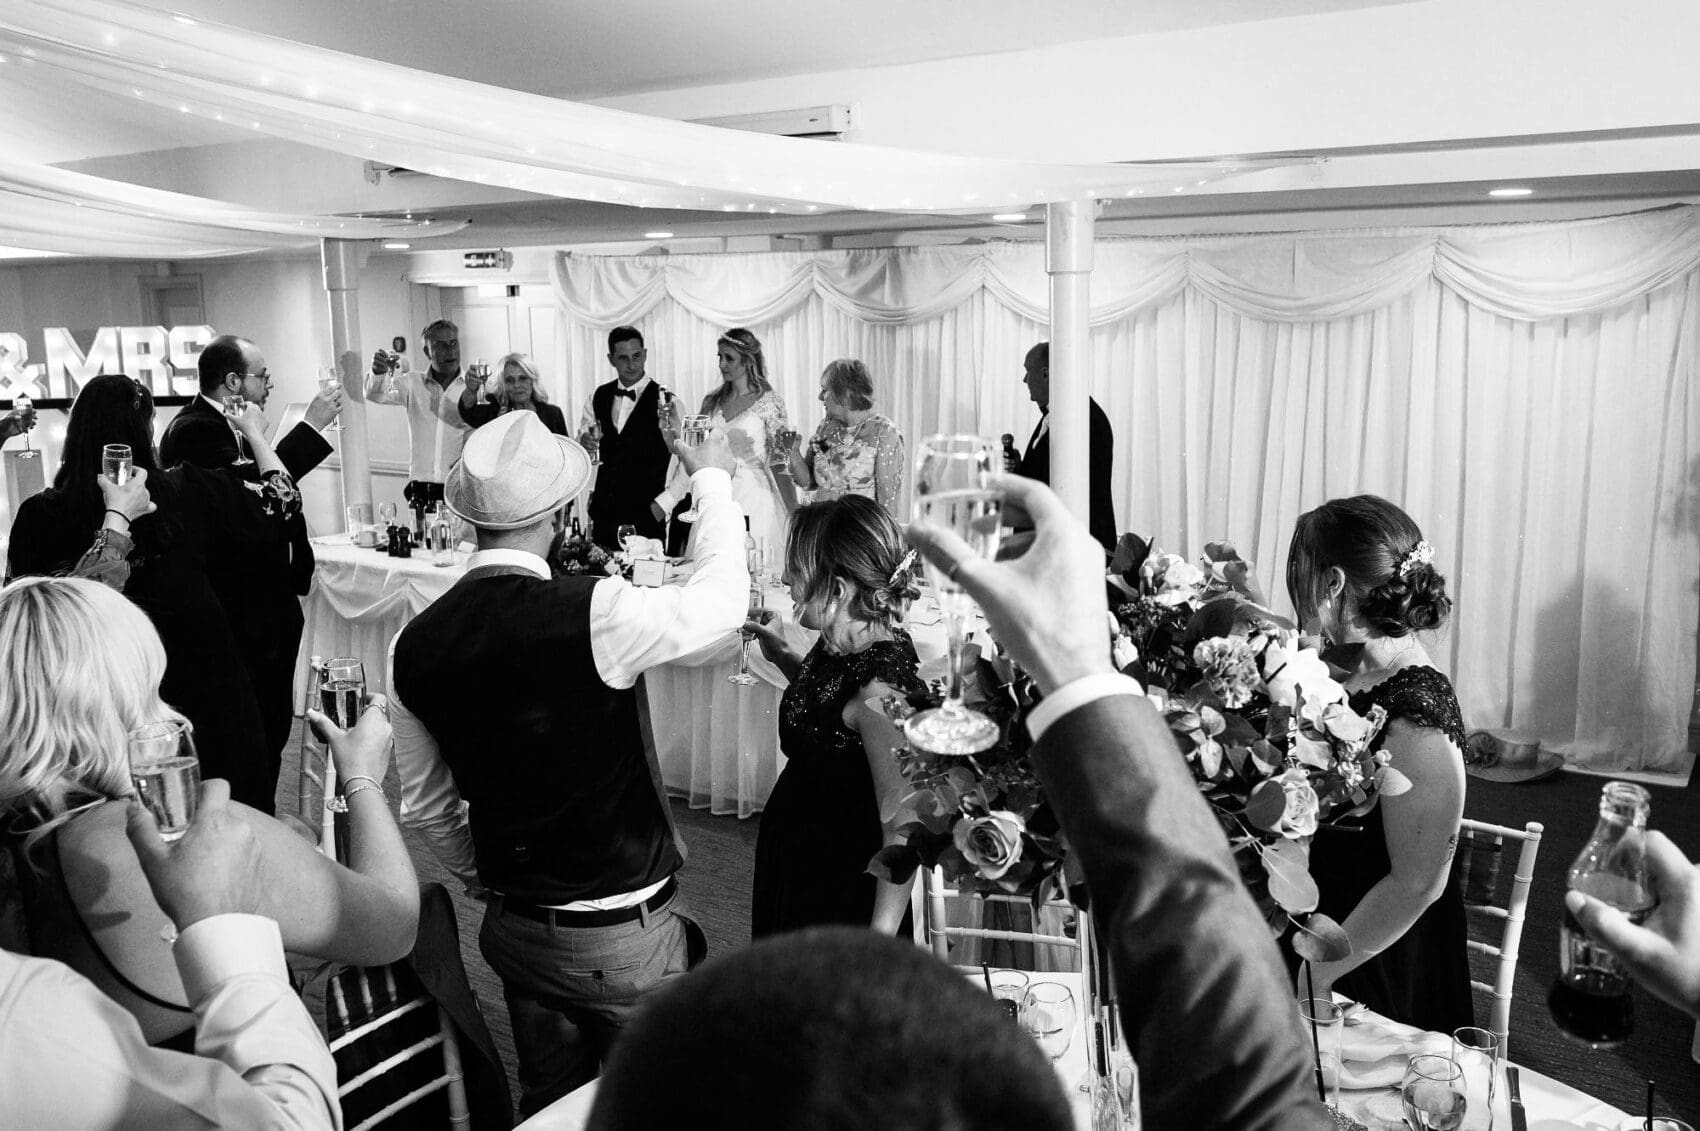 Guests raise a glase to the couple